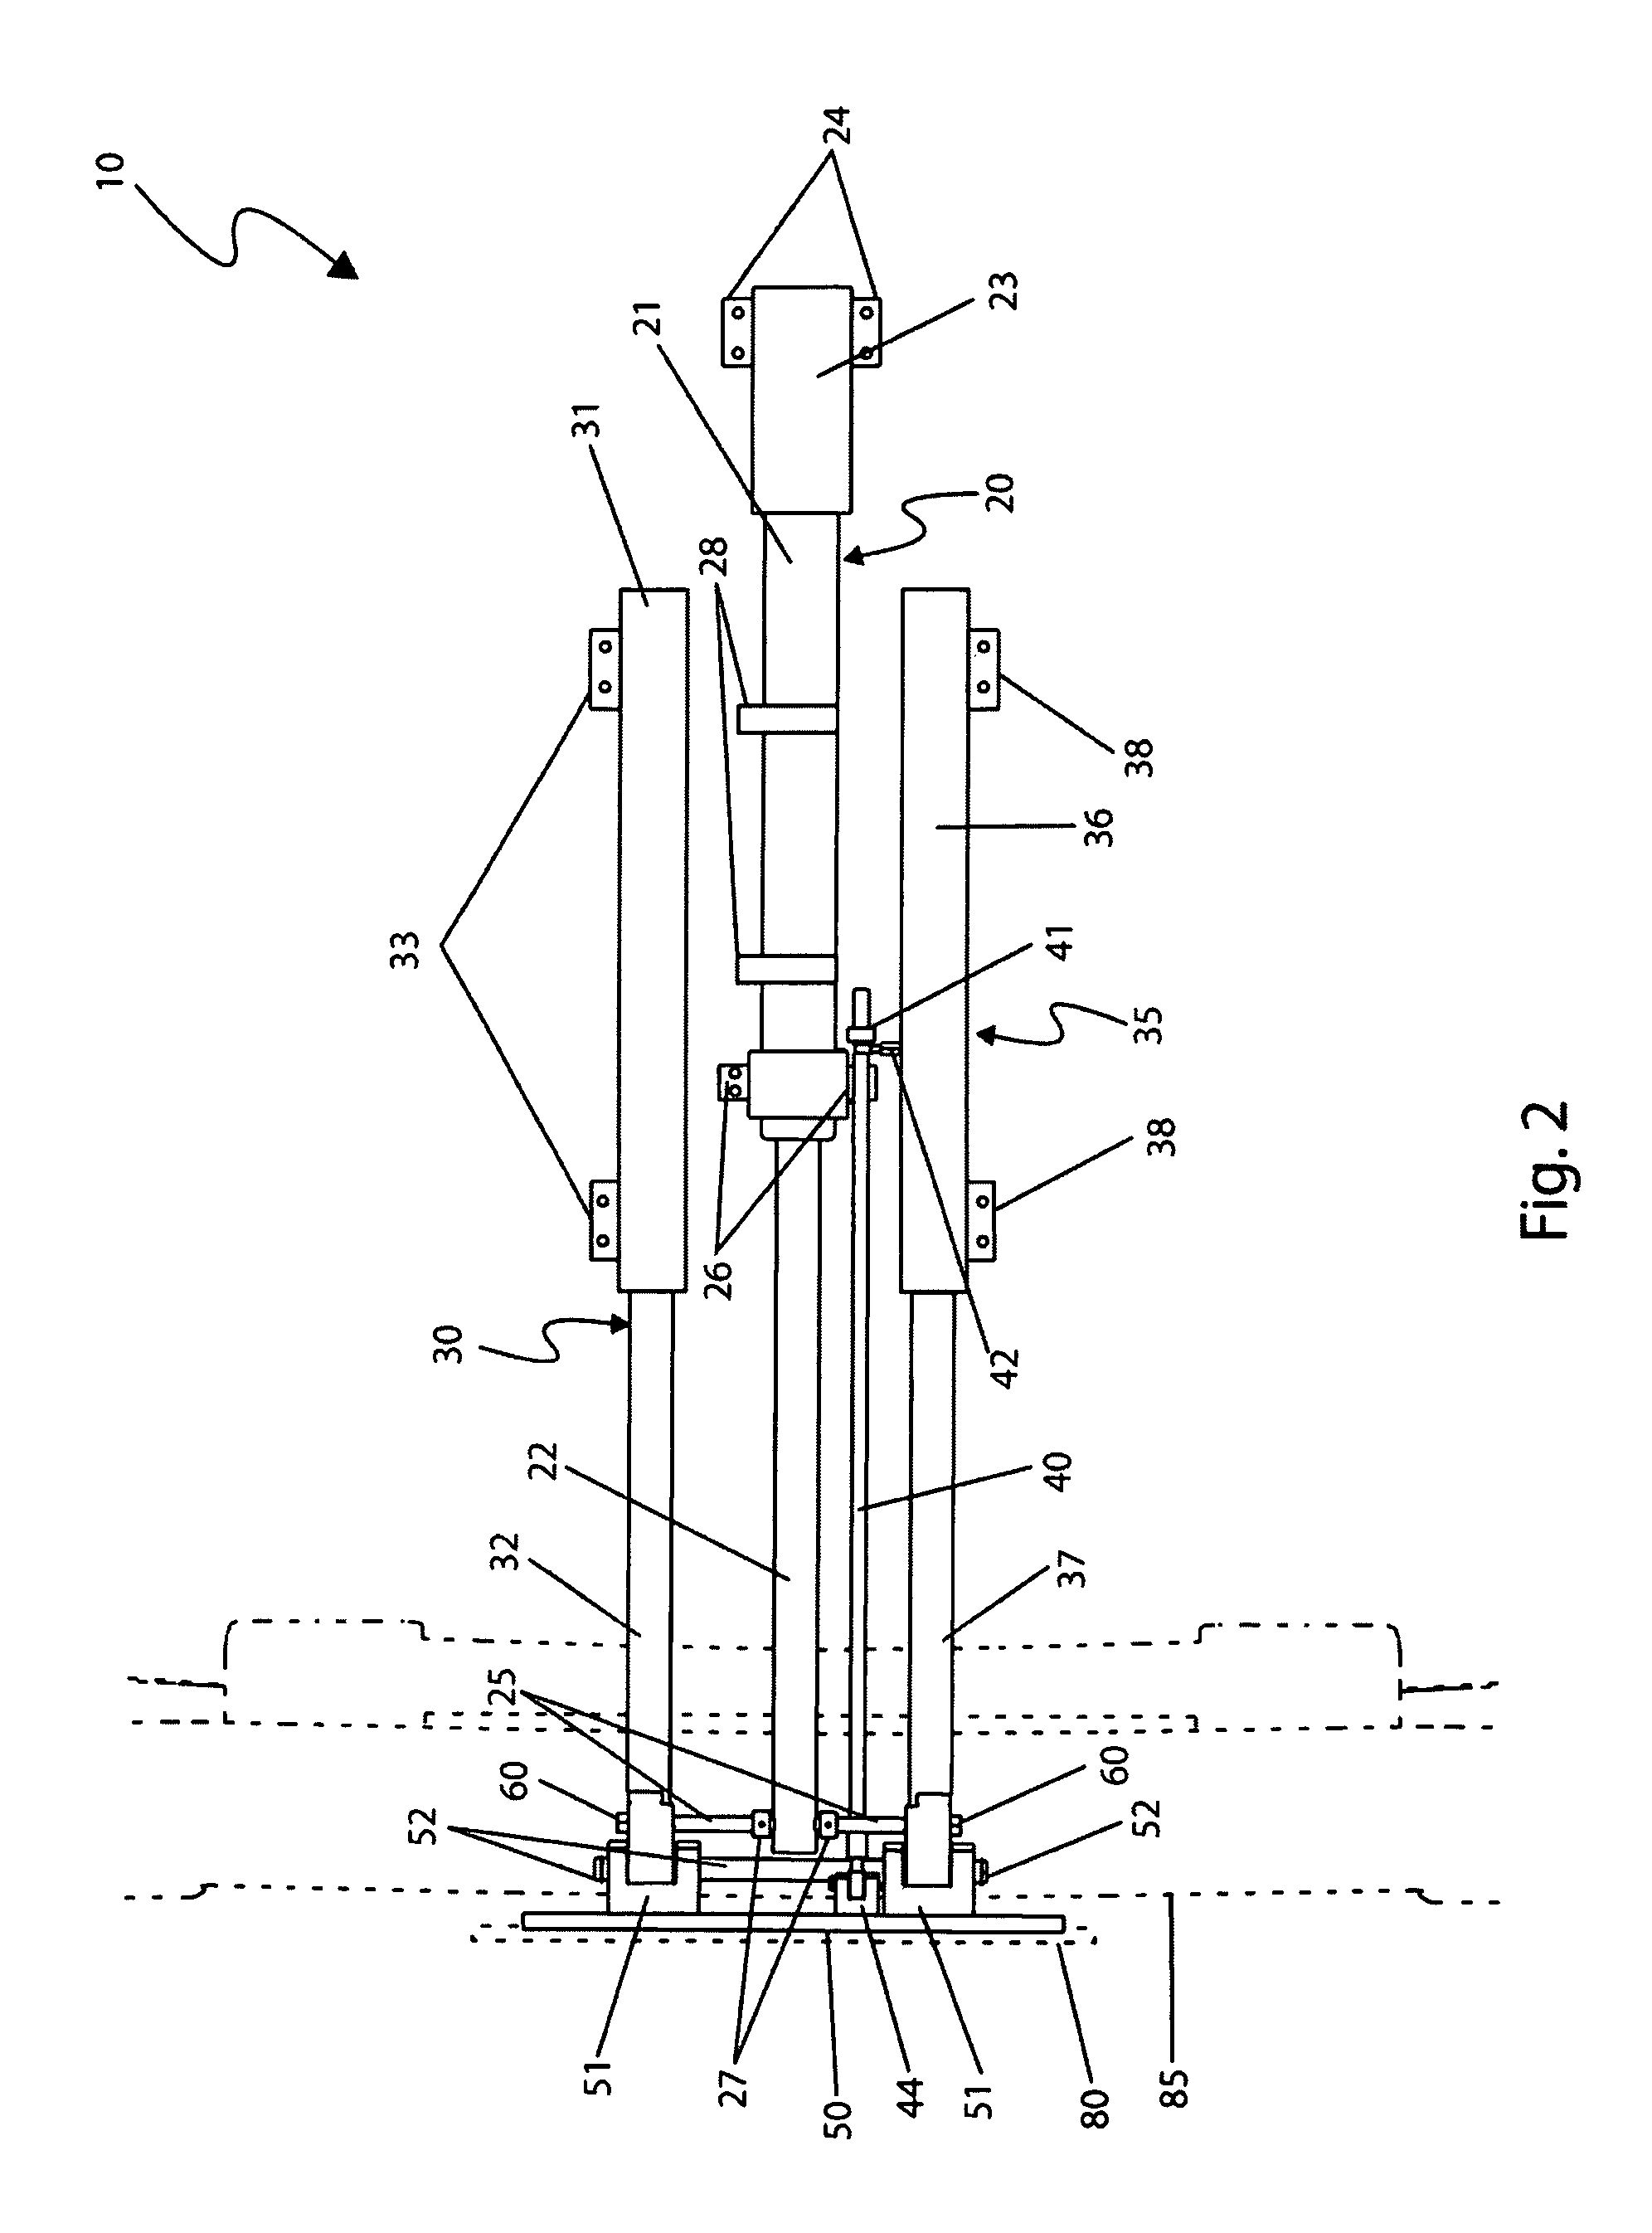 Tag plate positioning bracket